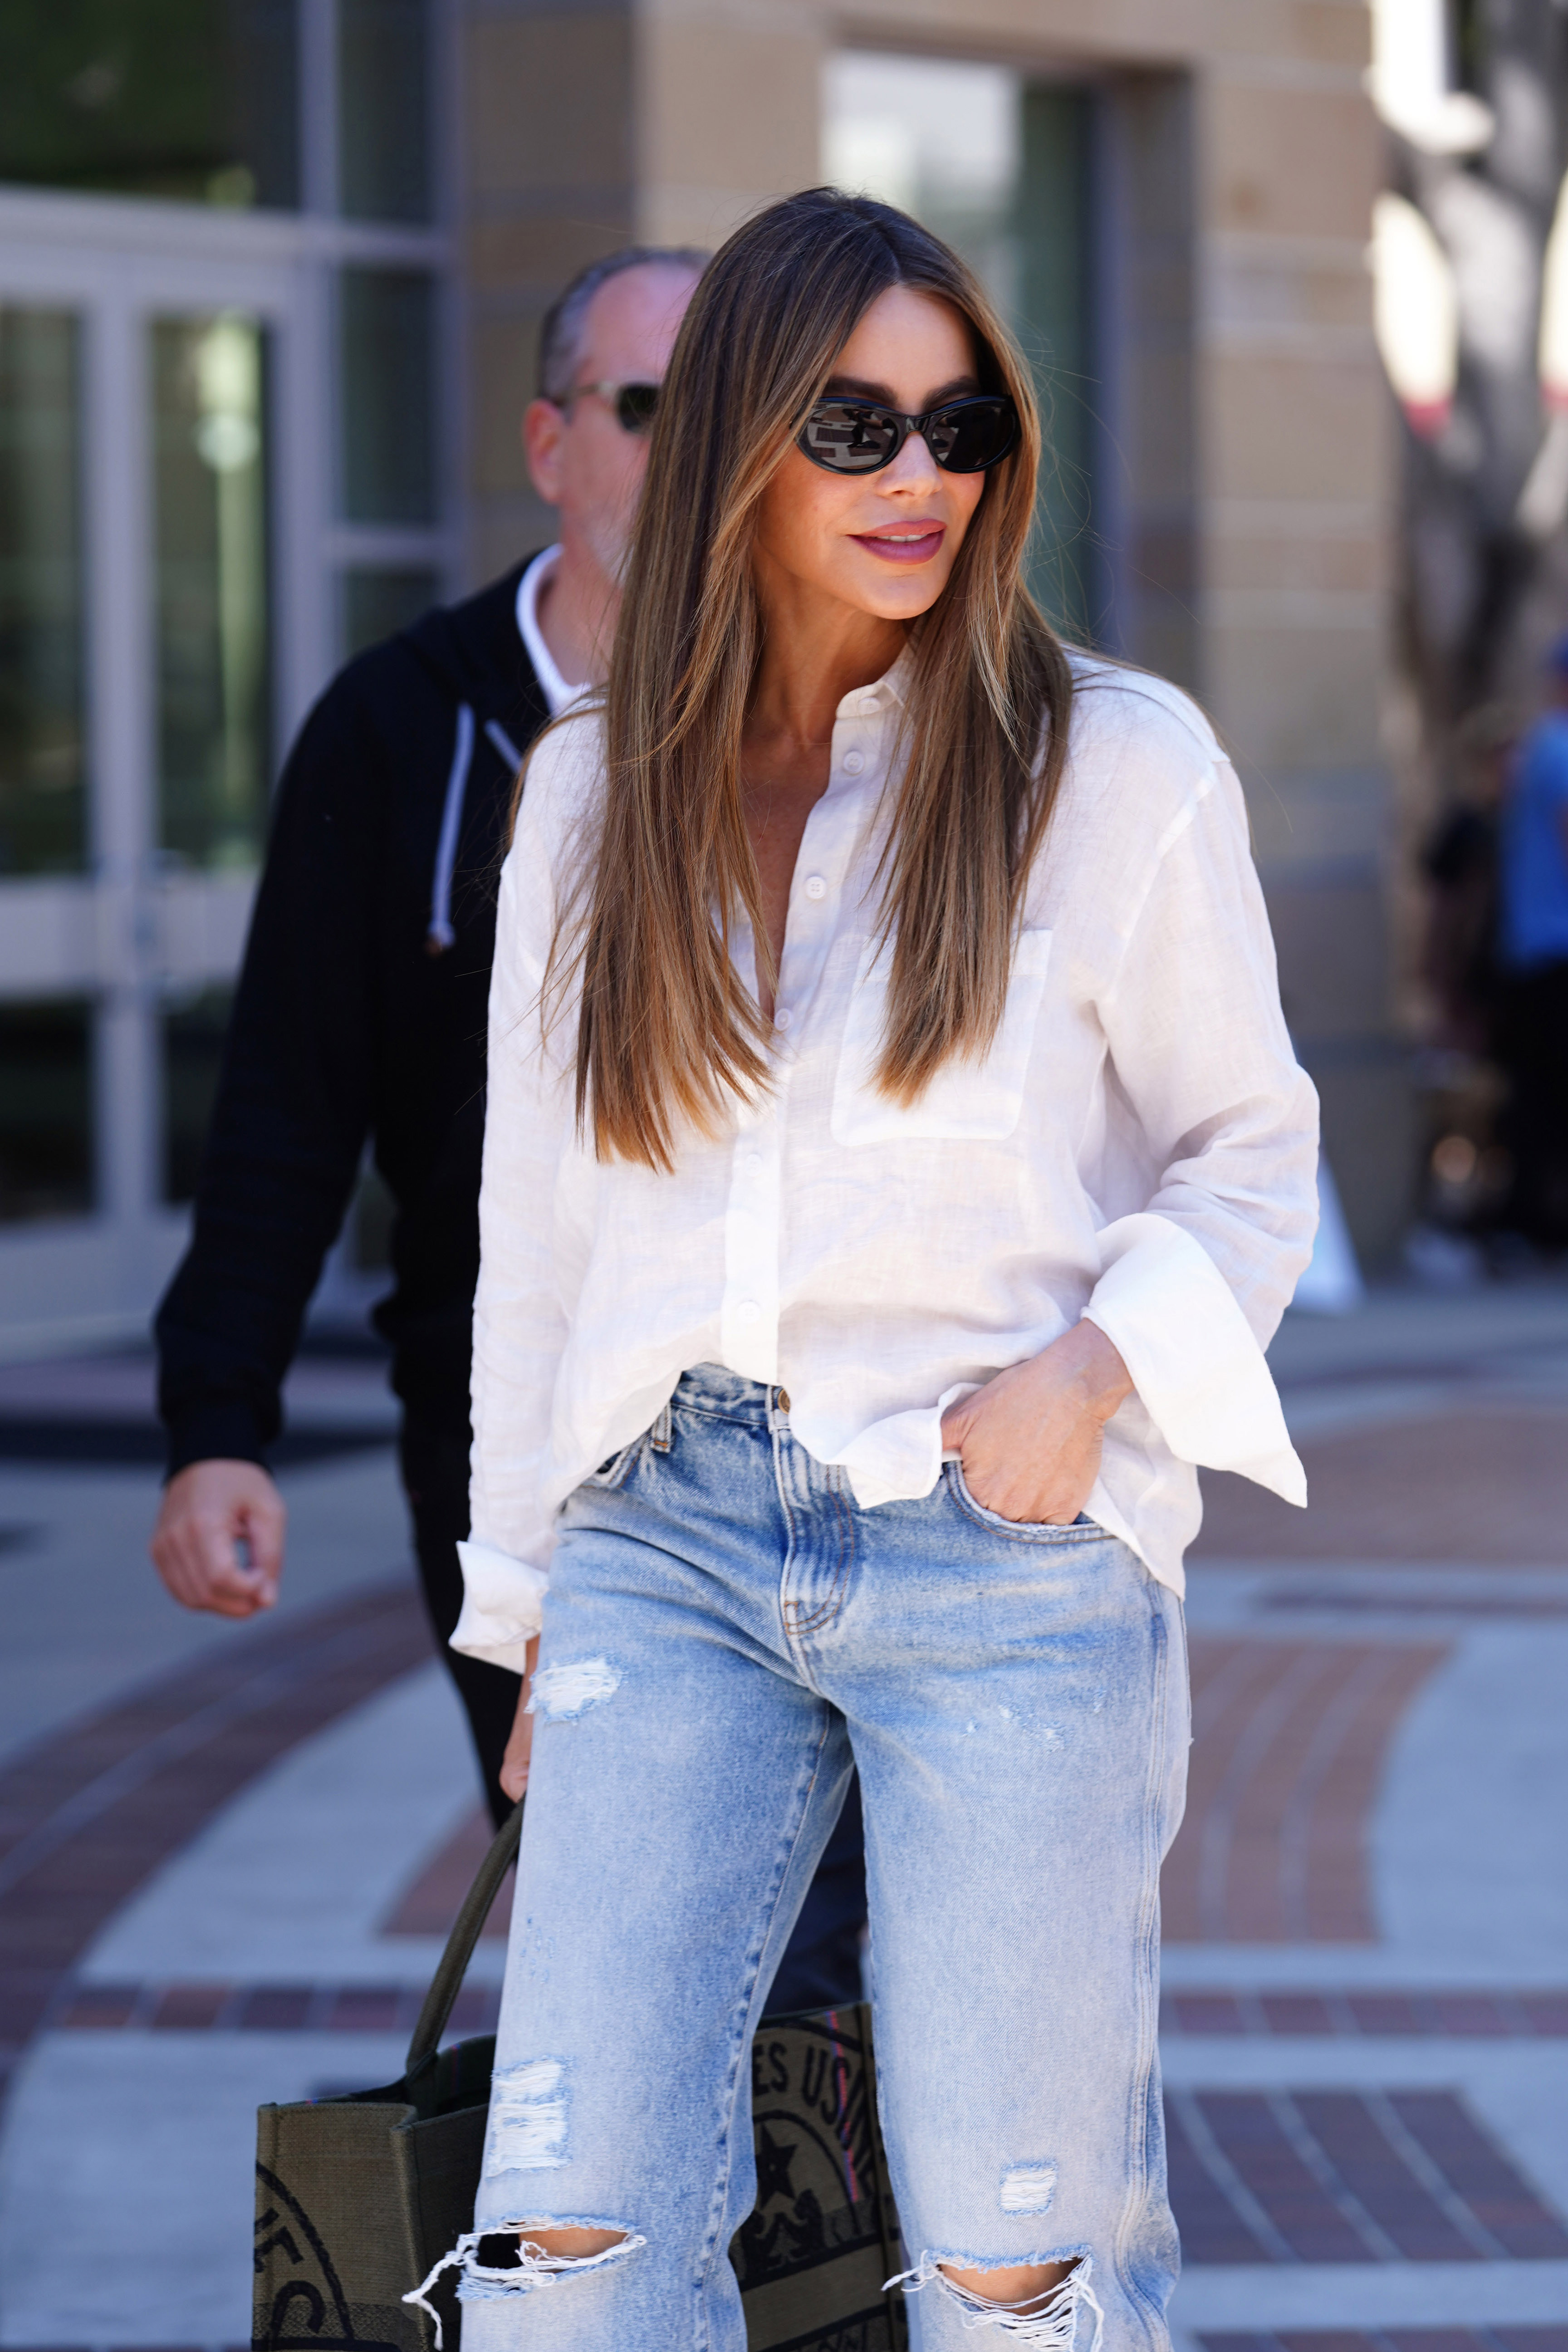 Sofia Vergara walking outside in a blouse and ripped jeans